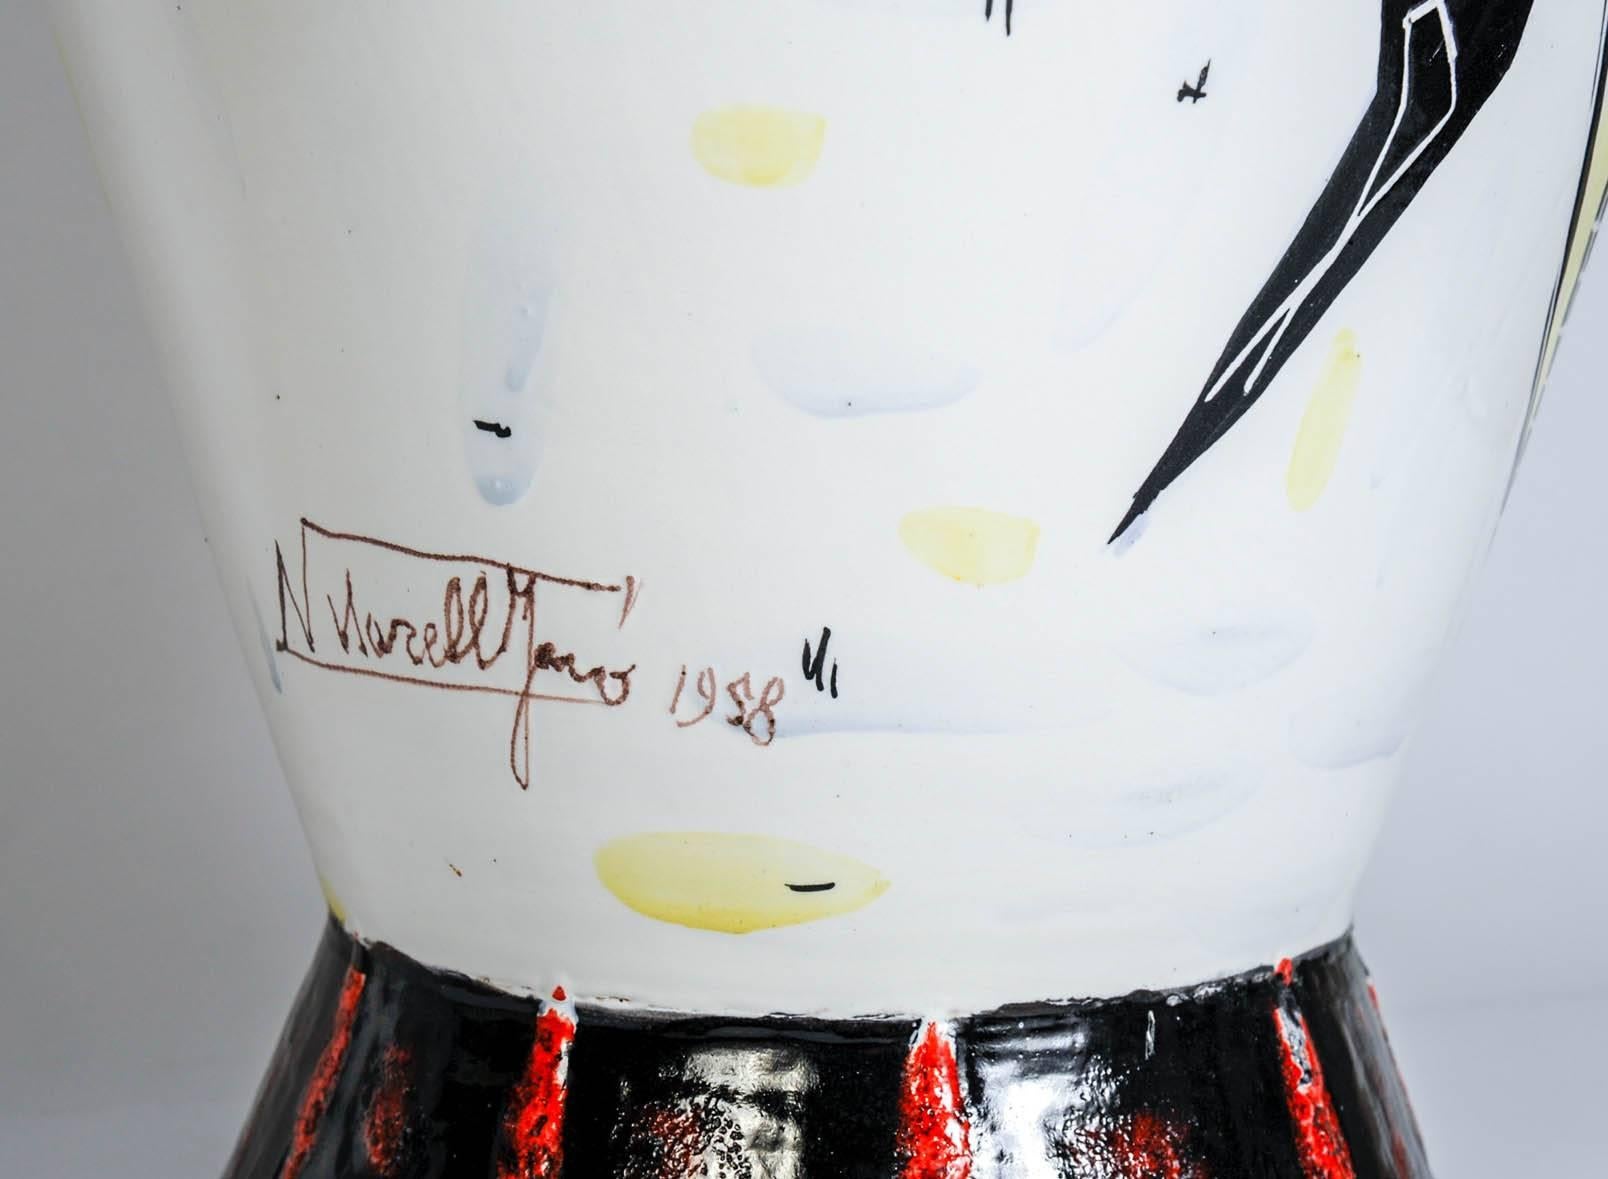 Tall vase in ceramic in the style of Fantoni.
Signed N Narell Jaro
Dated 1958.